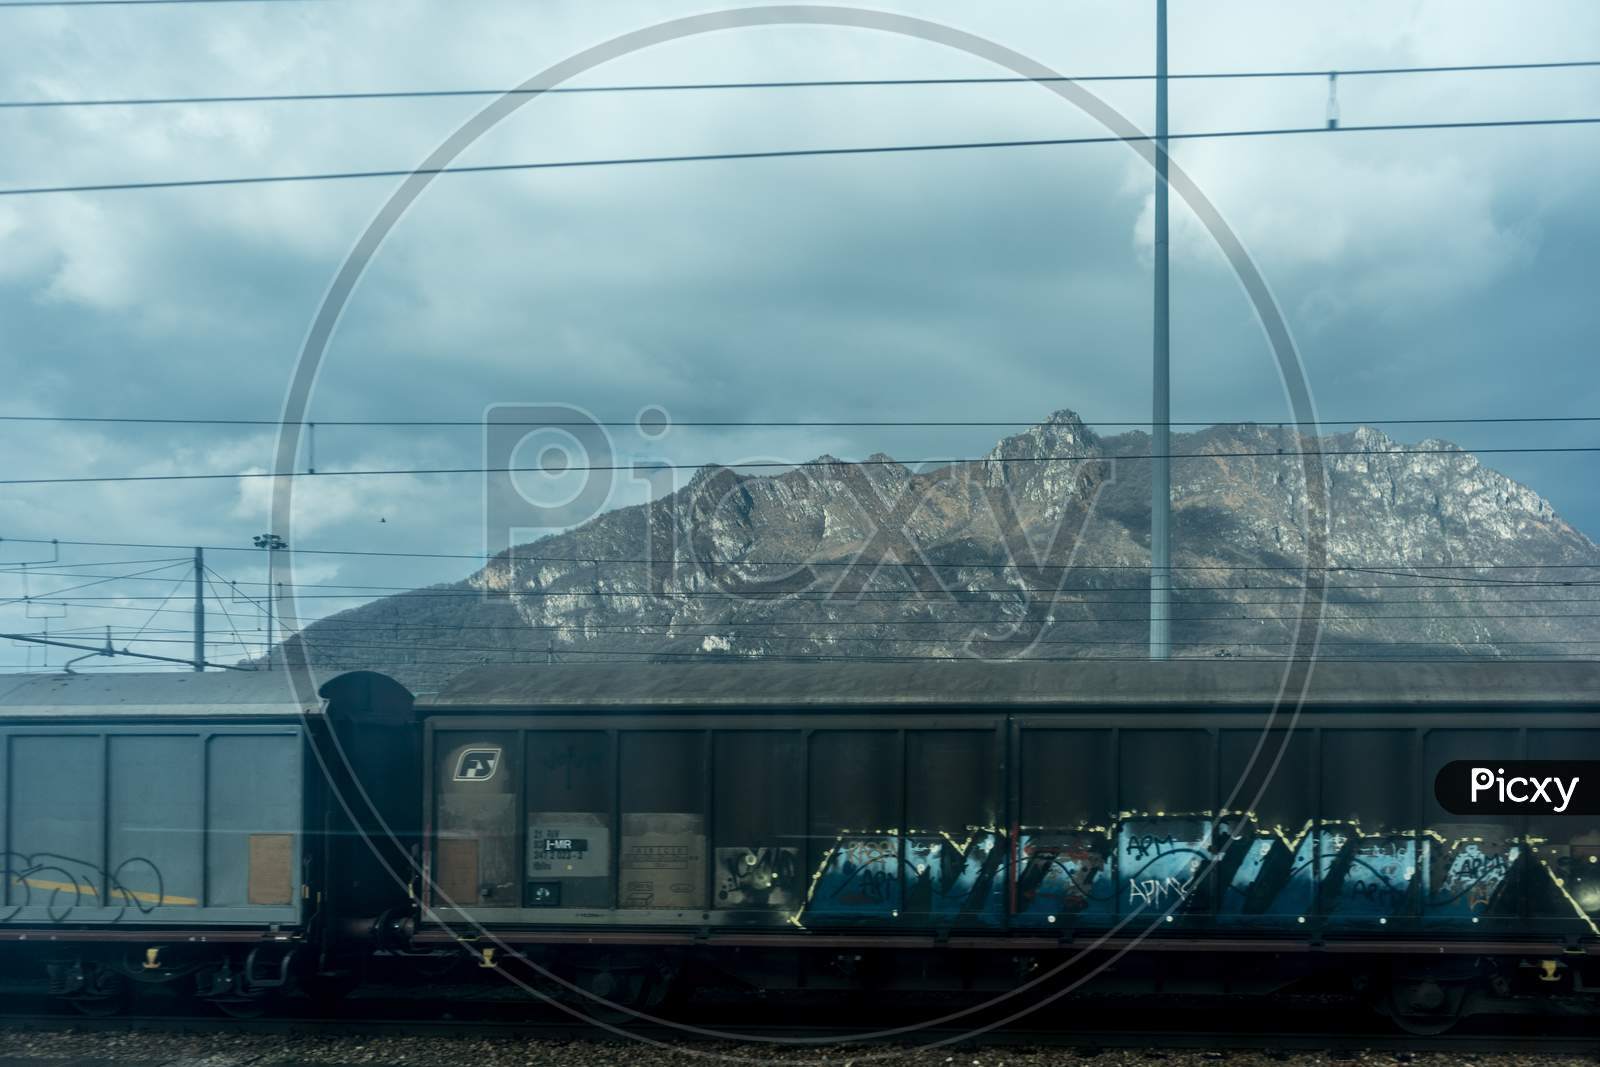 Milan - March 31: Train On The Outskirts Of Milan On March 31, 2018